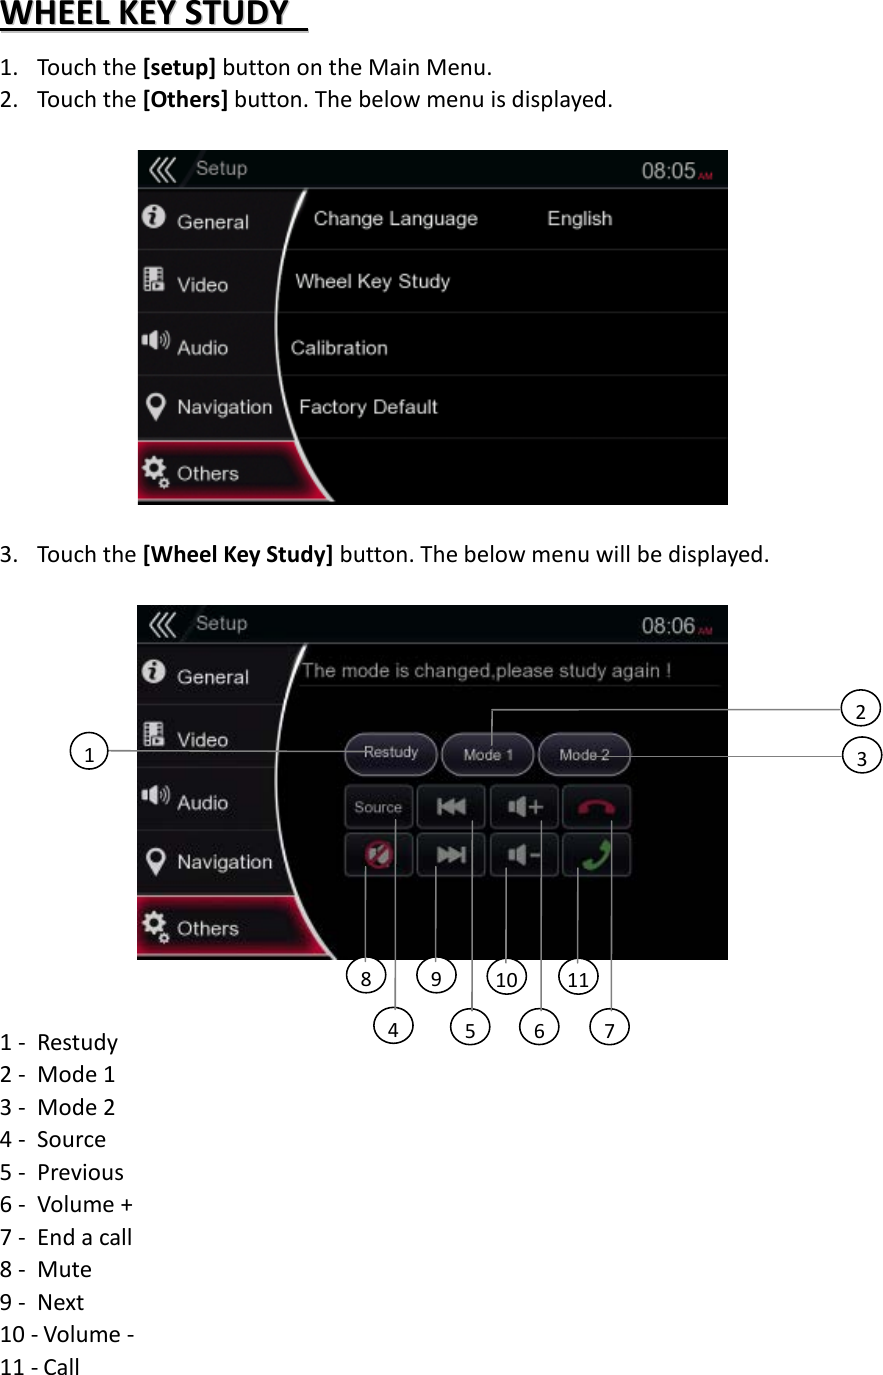 WWHHEEEELL  KKEEYY  SSTTUUDDYY    1. Touch the [setup] button on the Main Menu. 2. Touch the [Others] button. The below menu is displayed.    3. Touch the [Wheel Key Study] button. The below menu will be displayed.    1 - Restudy 2 - Mode 1 3 - Mode 2 4 - Source 5 - Previous 6 - Volume + 7 - End a call 8 - Mute 9 - Next 10 - Volume -   11 - Call 2 3 1 5 9 8 10 11 4 6 7 